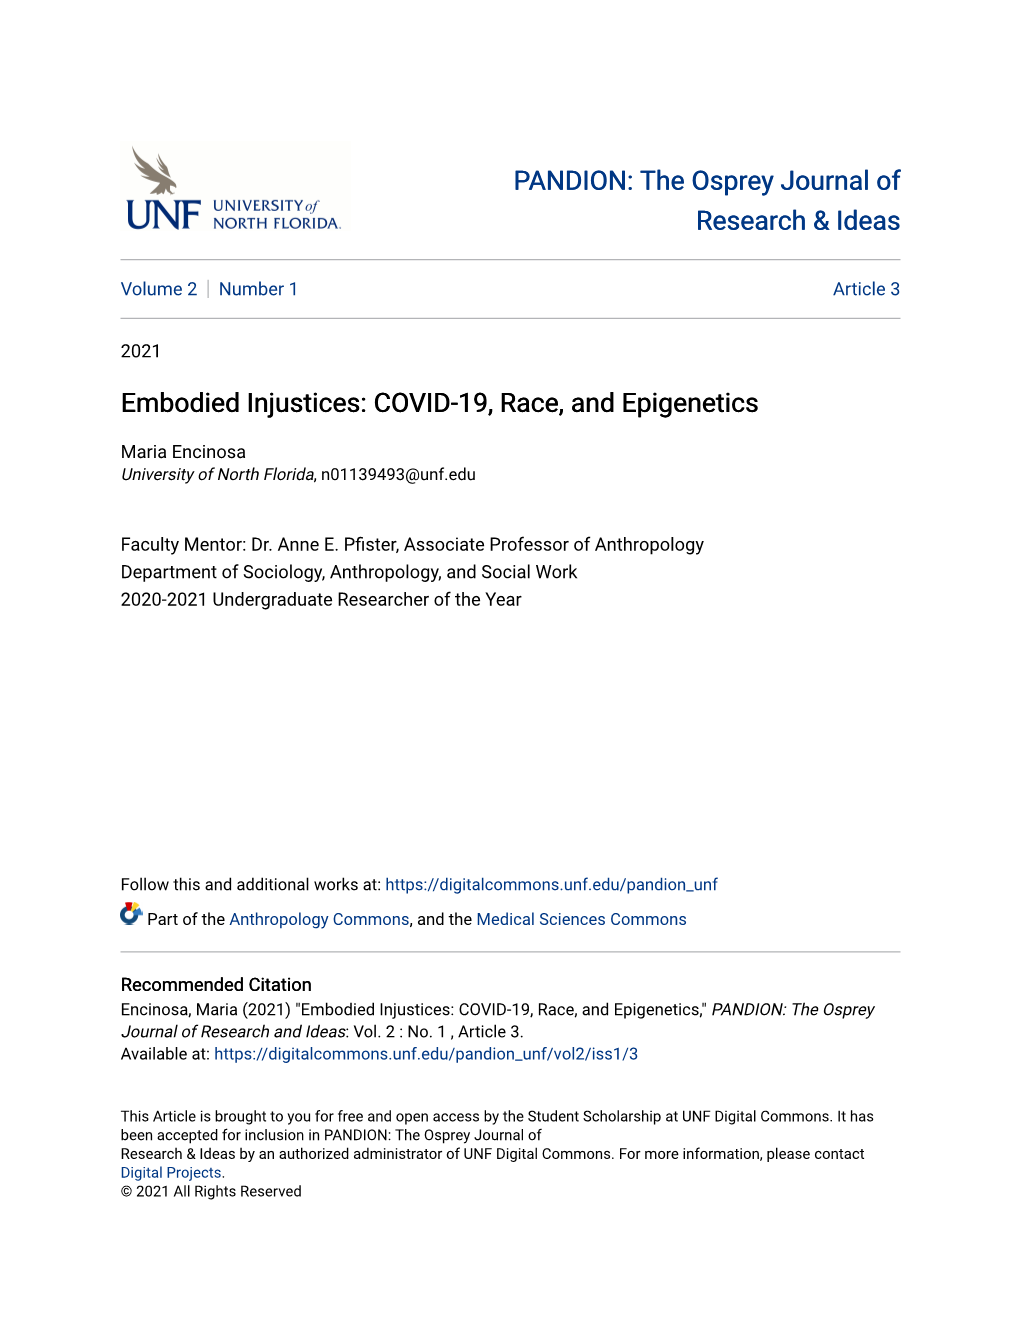 Embodied Injustices: COVID-19, Race, and Epigenetics